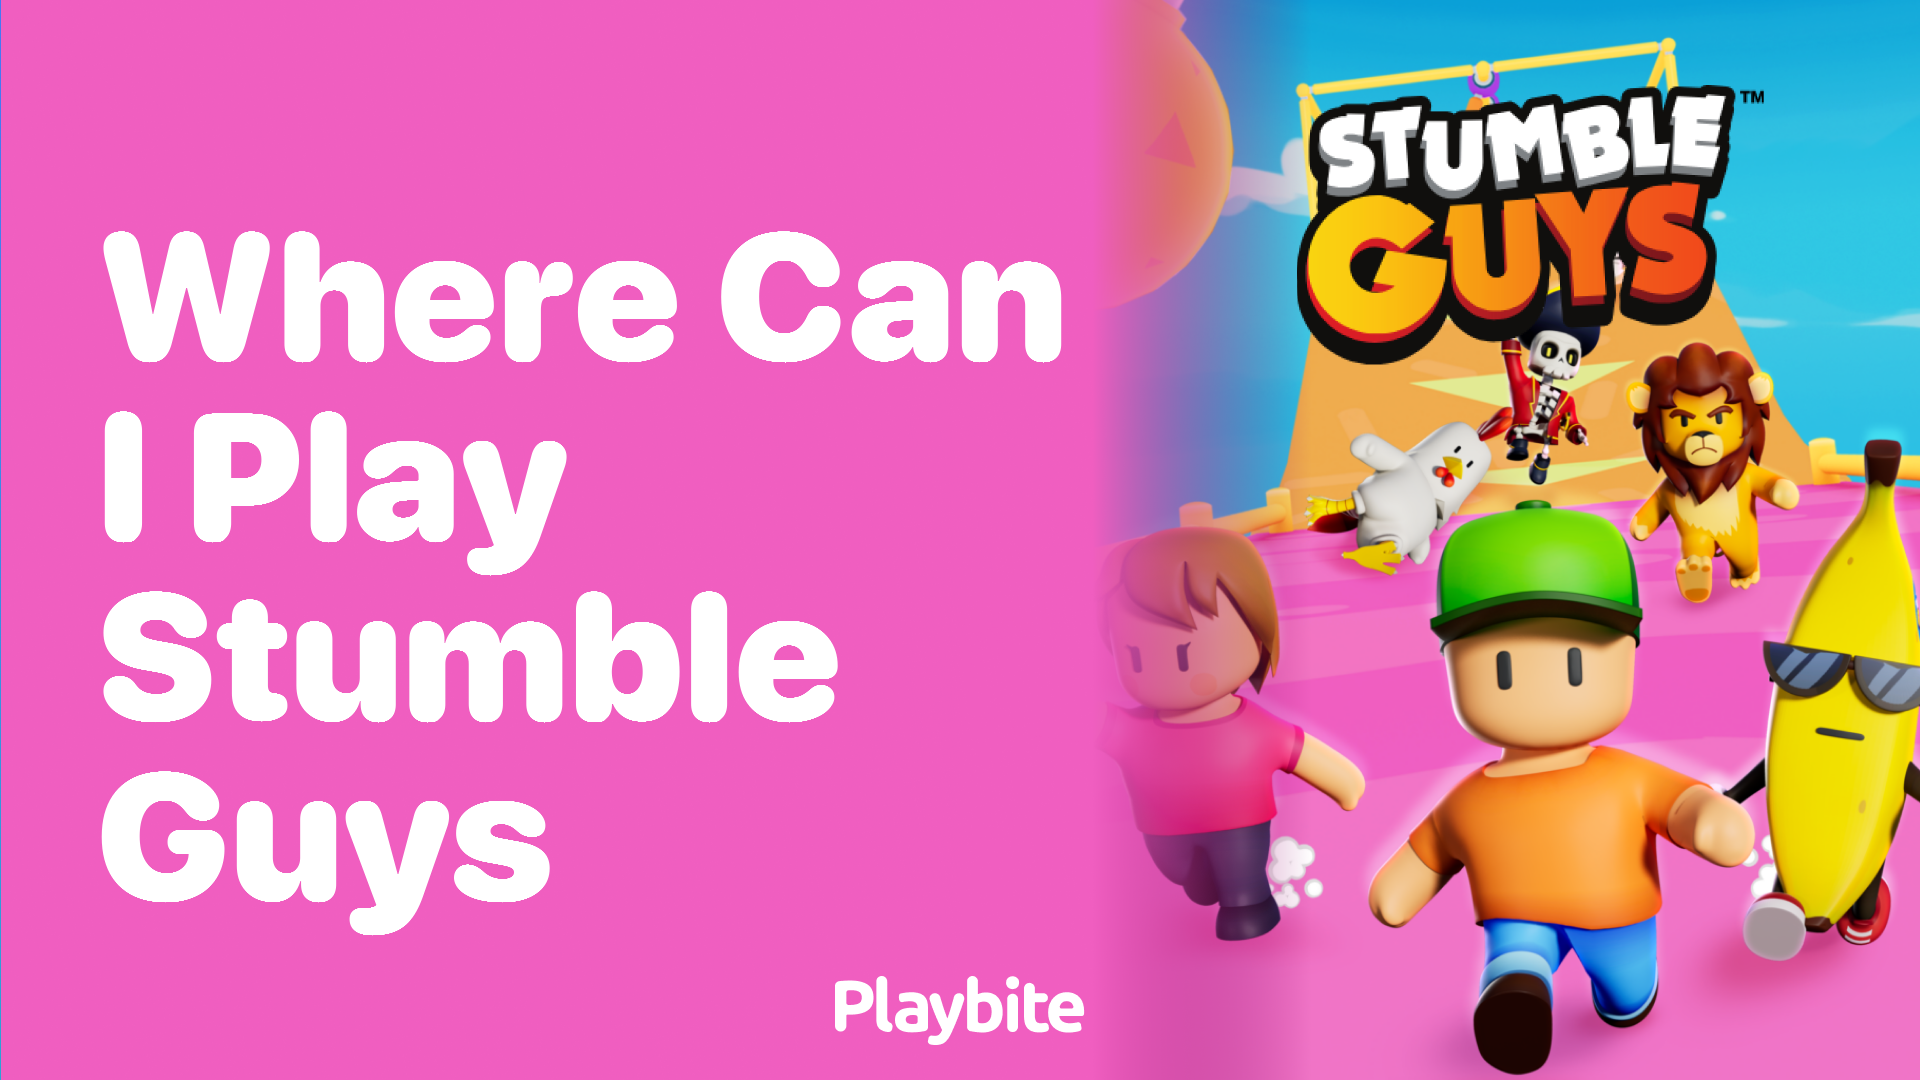 Where Can I Play Stumble Guys? Uncover the Platforms!